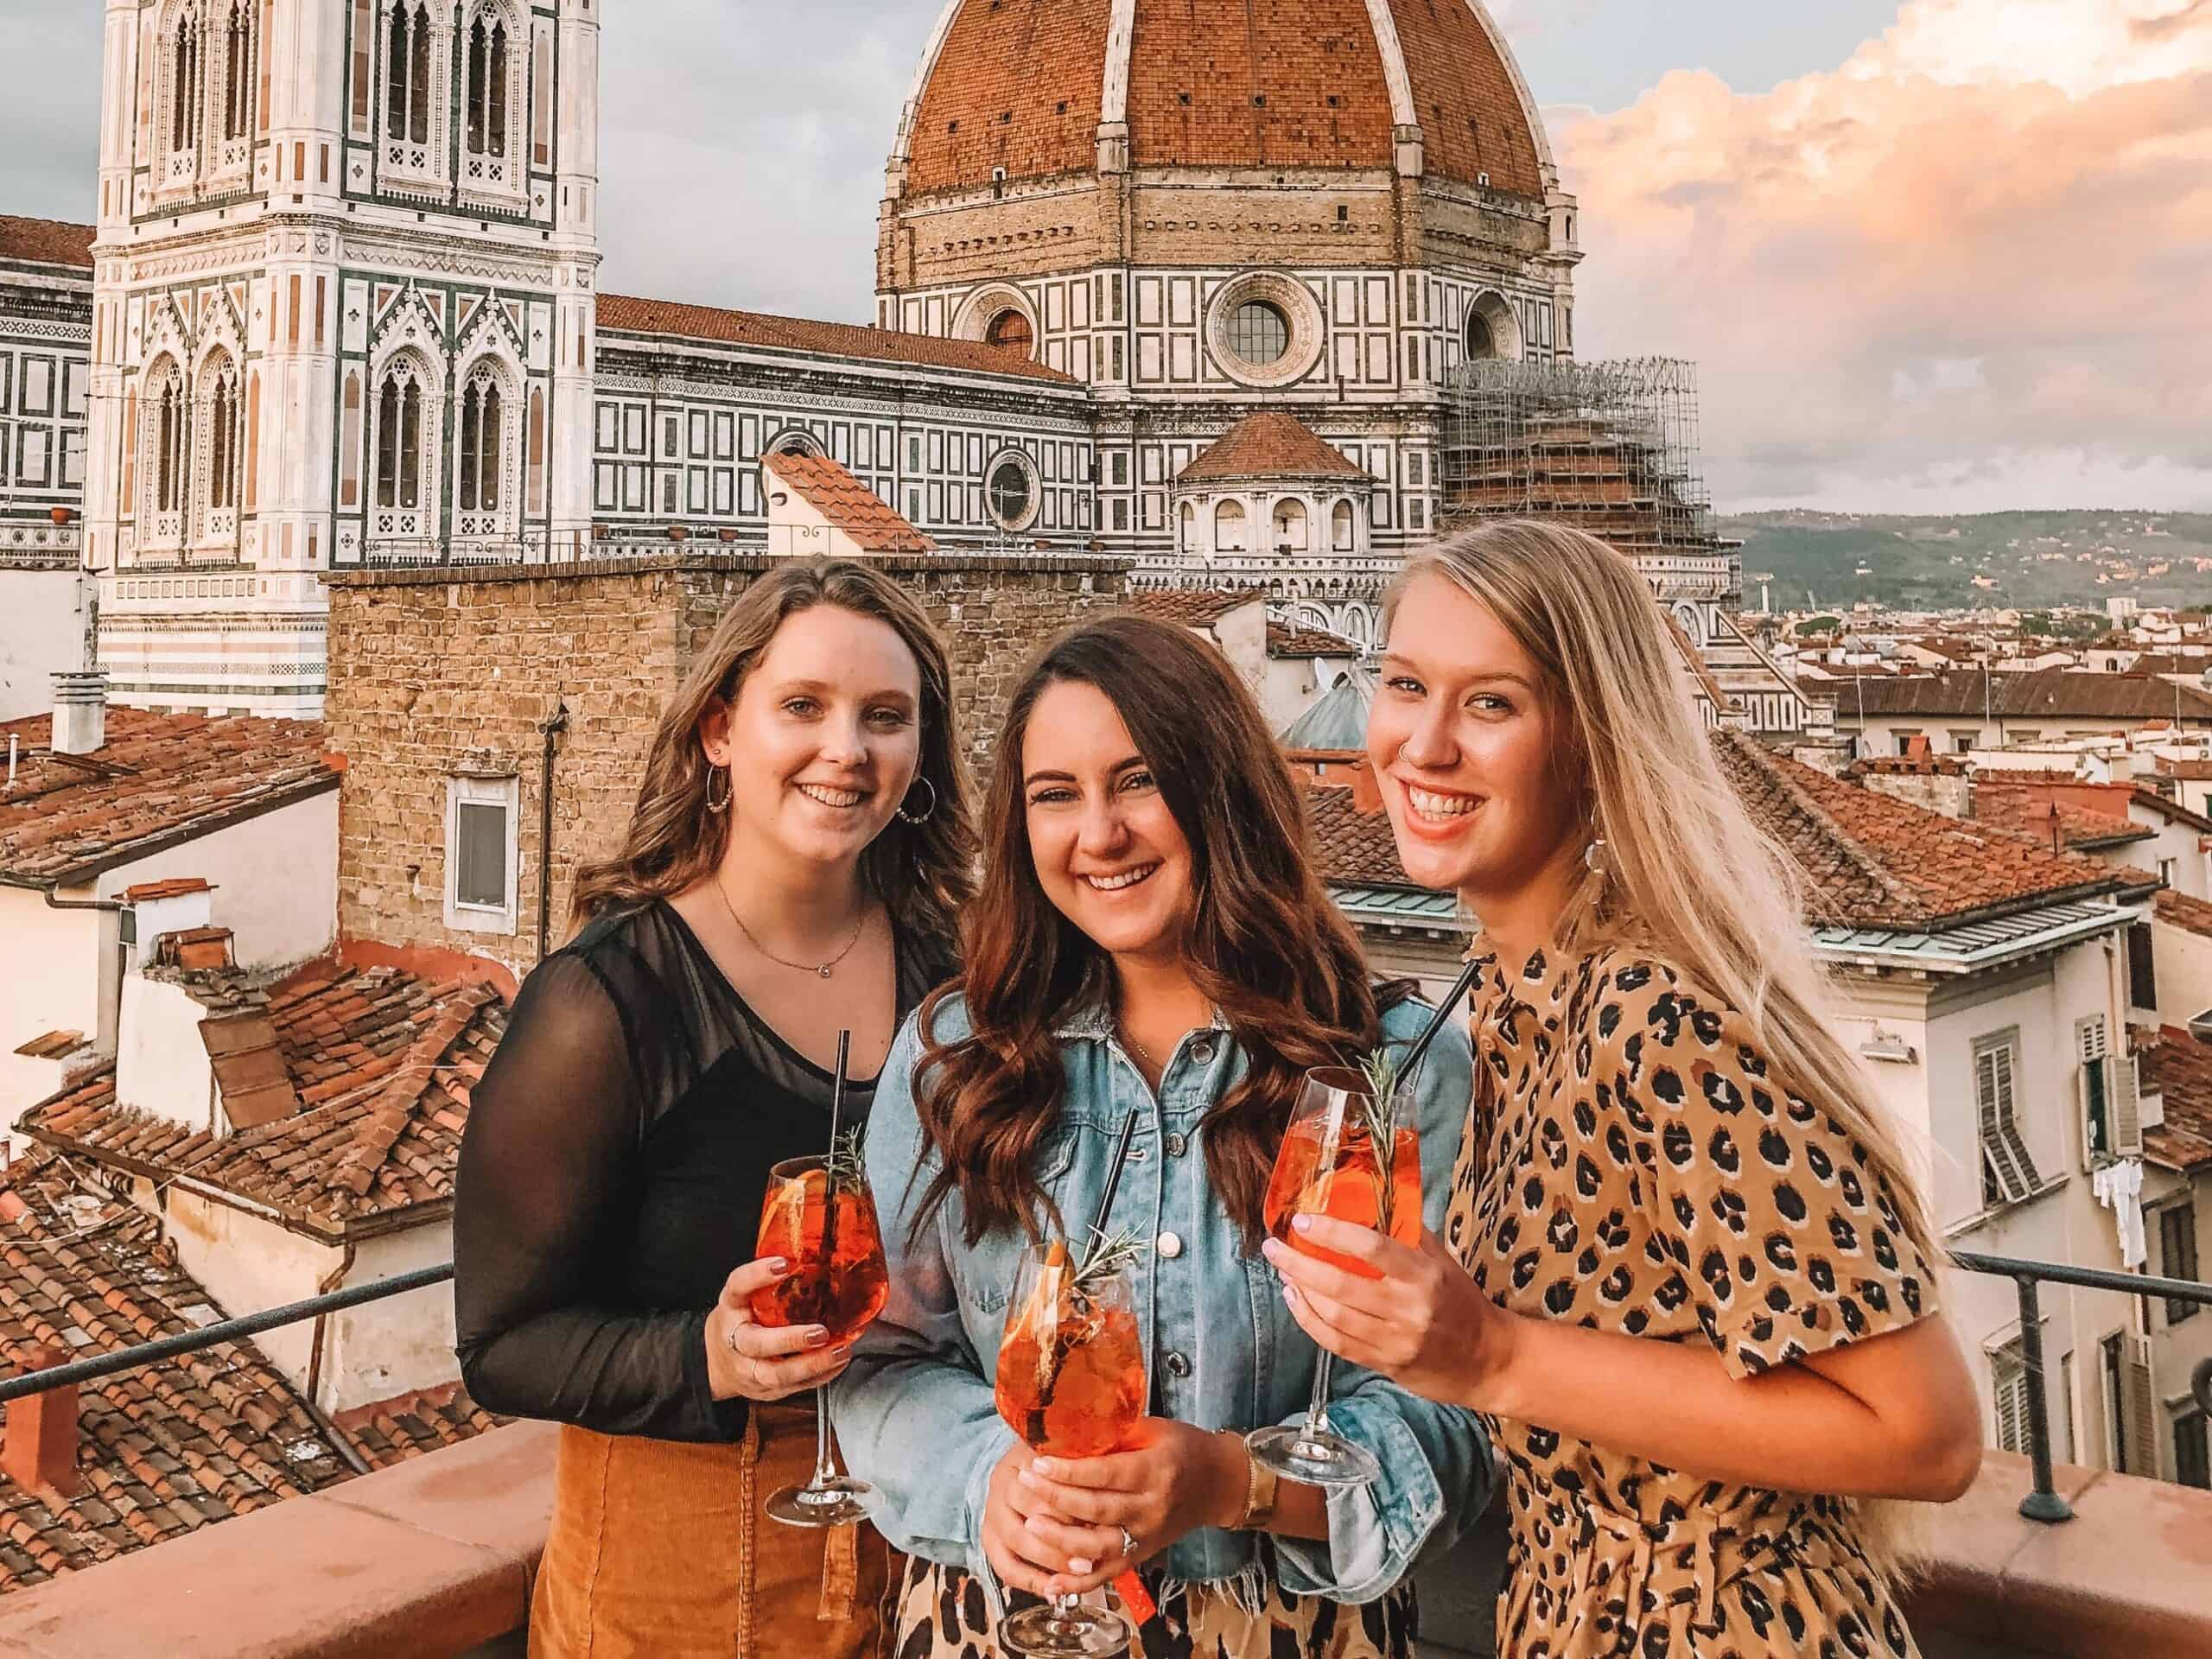 How to Make Travel Friends When Solo Traveling